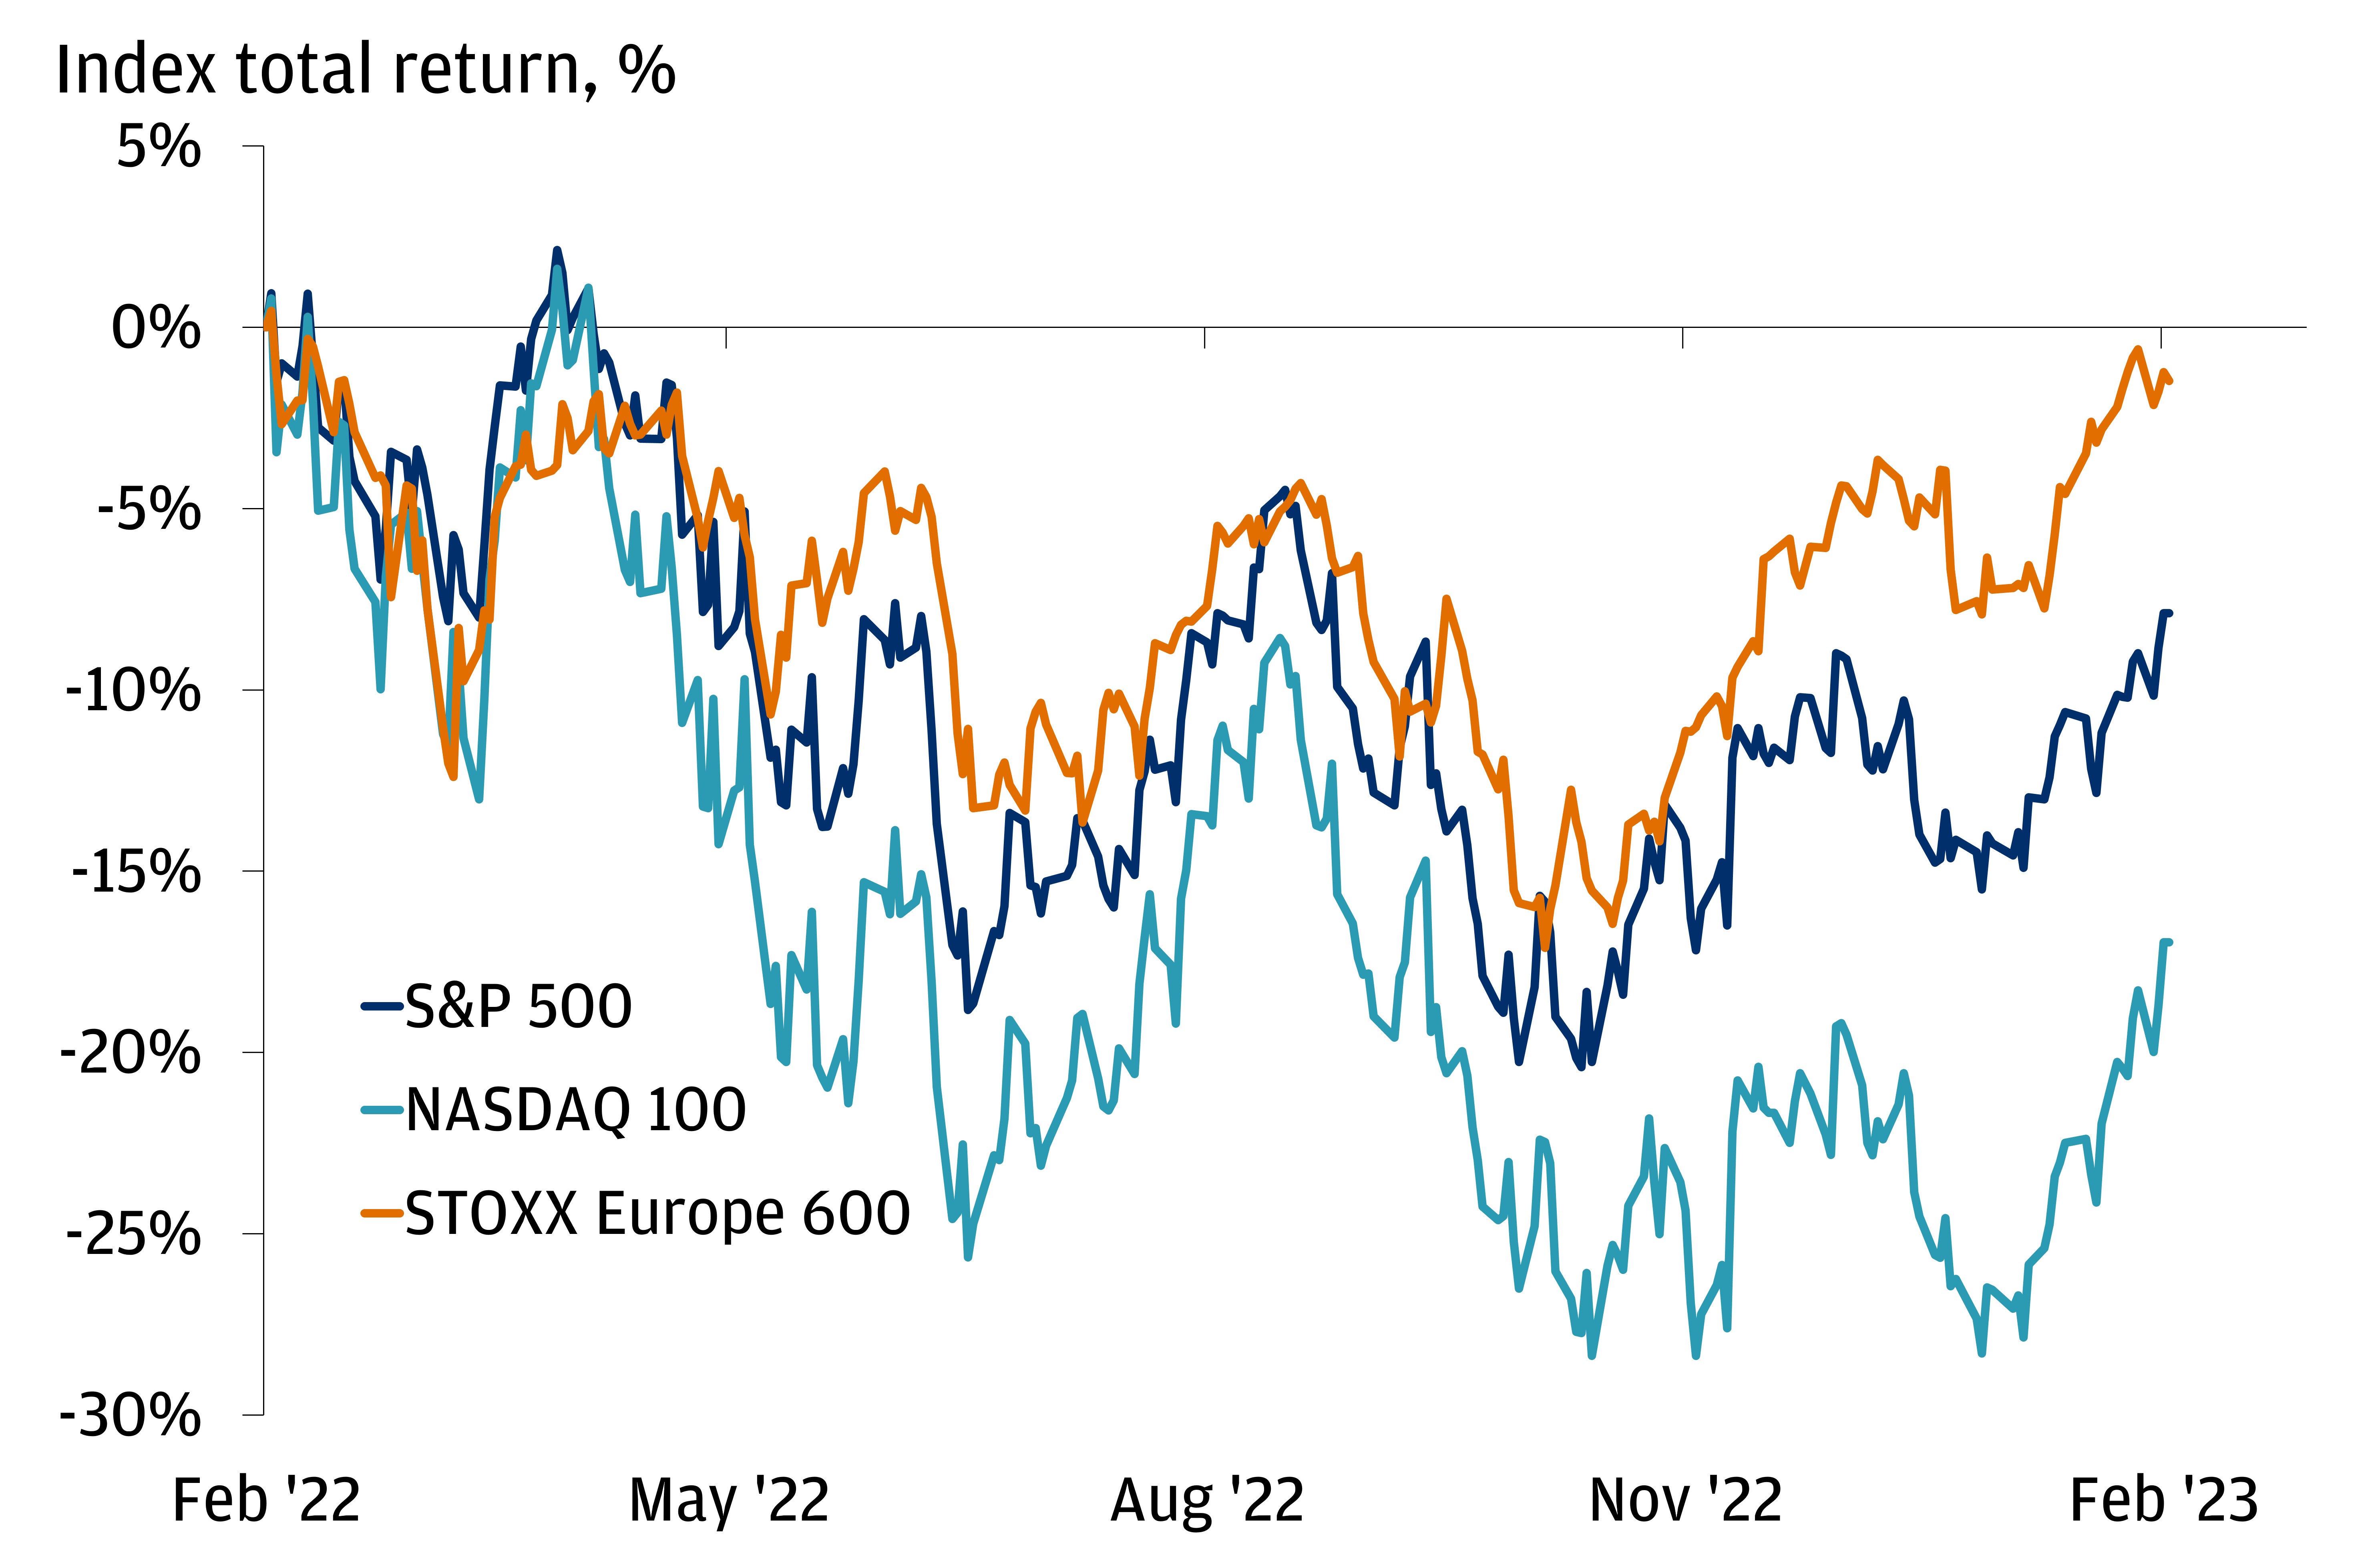 This chart shows the index price return for the S&P 500, NASDAQ 100 and STOXX Europe 600 from February 2022 through February 2, 2023. The indices have similar stories, but STOXX Europe 600 has outperformed throughout the past year.